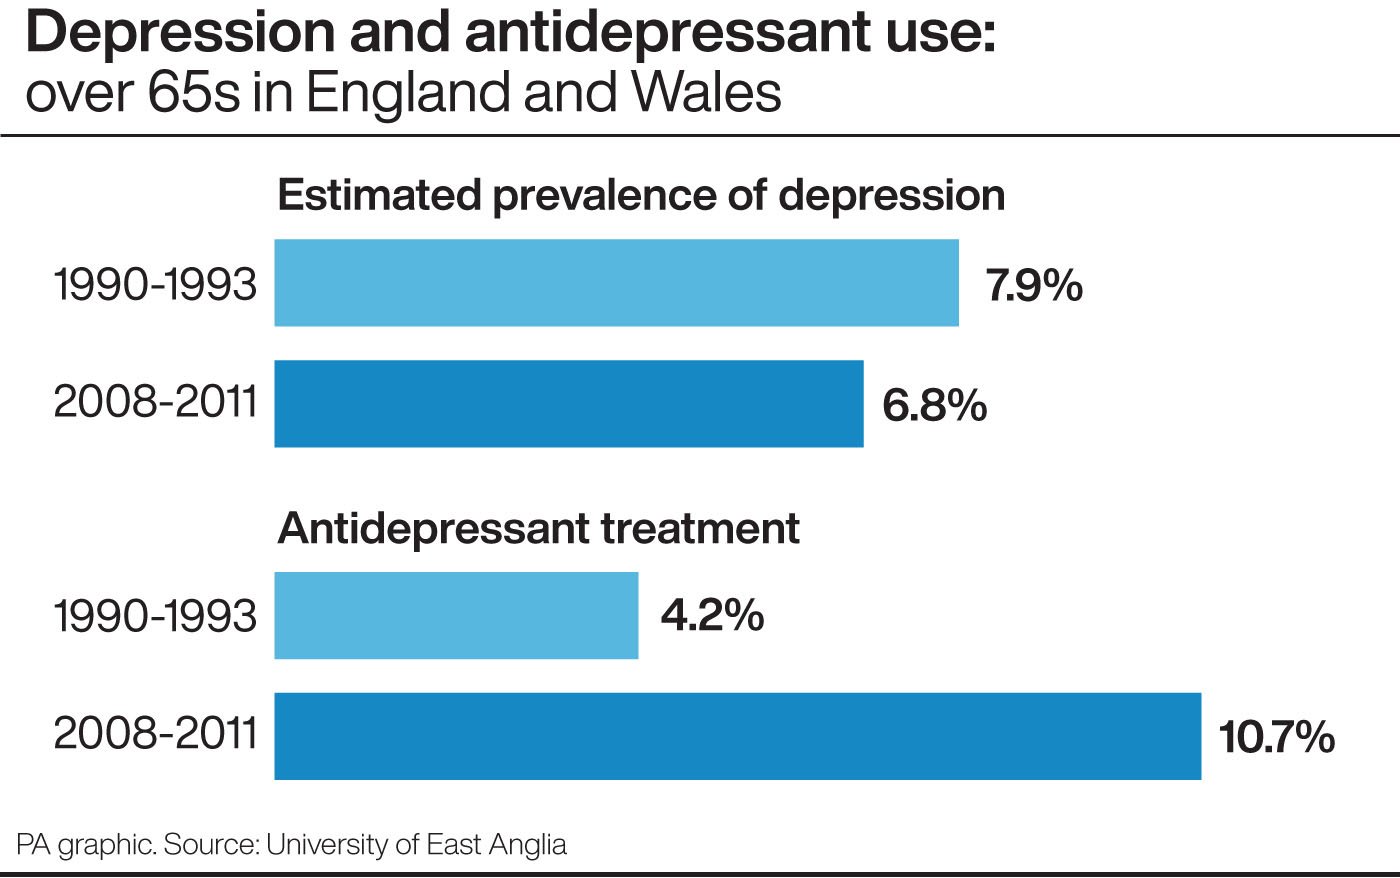 Depression and antidepressant use: over 65s in England and Wales